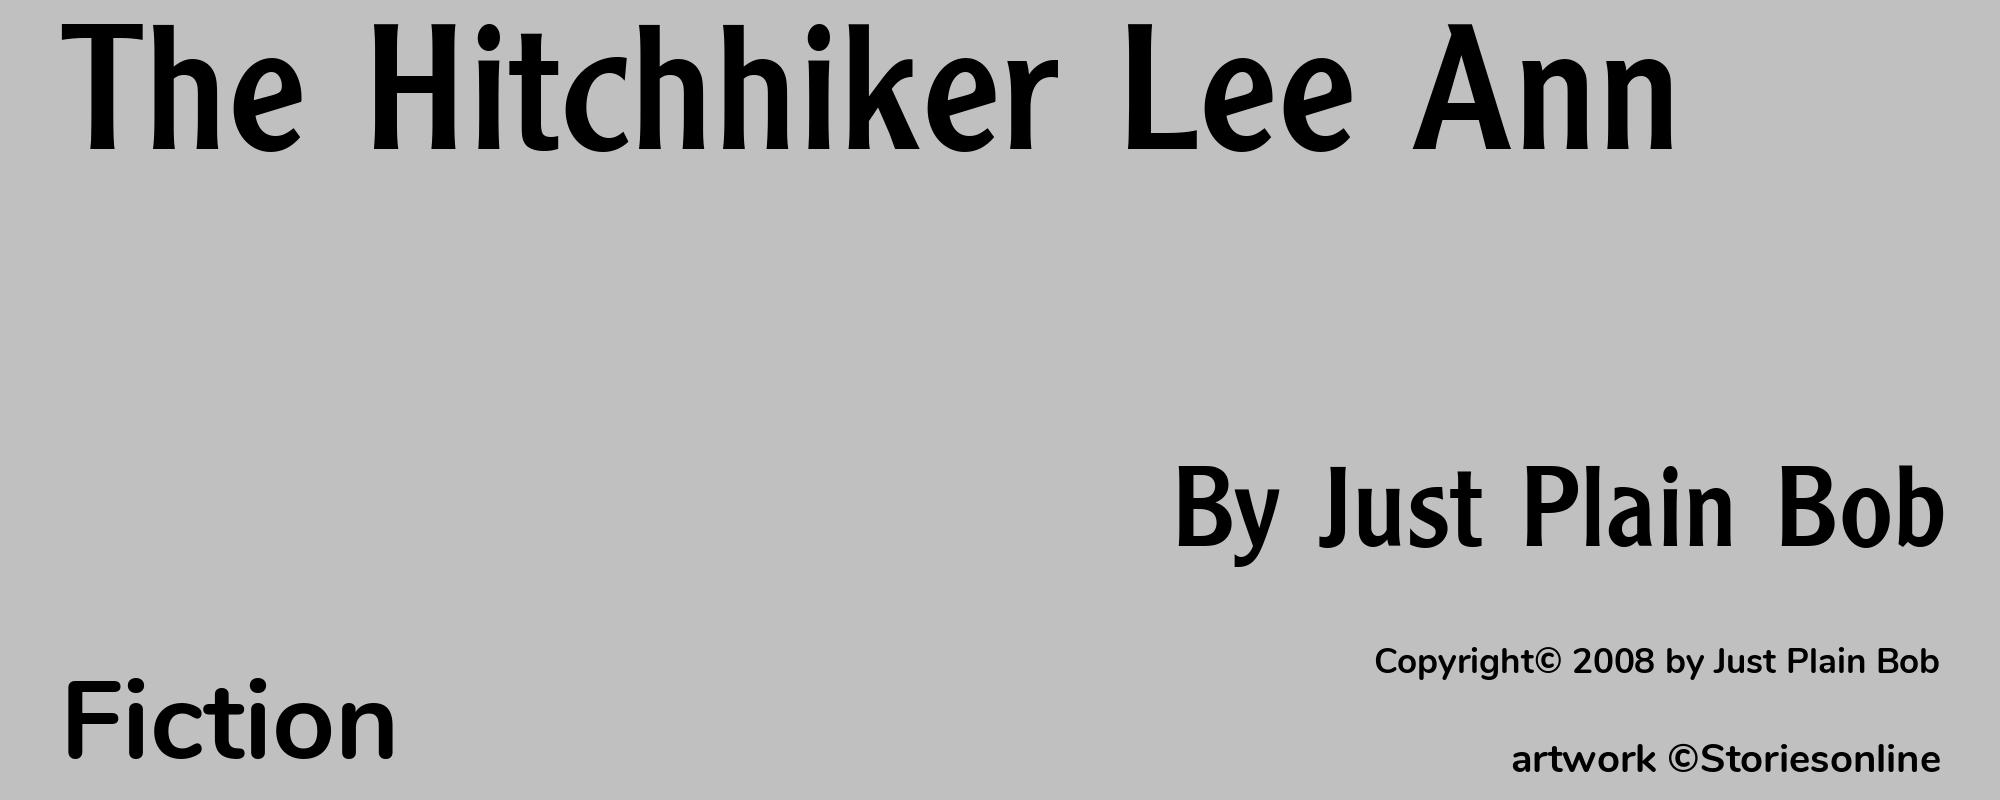 The Hitchhiker Lee Ann - Cover